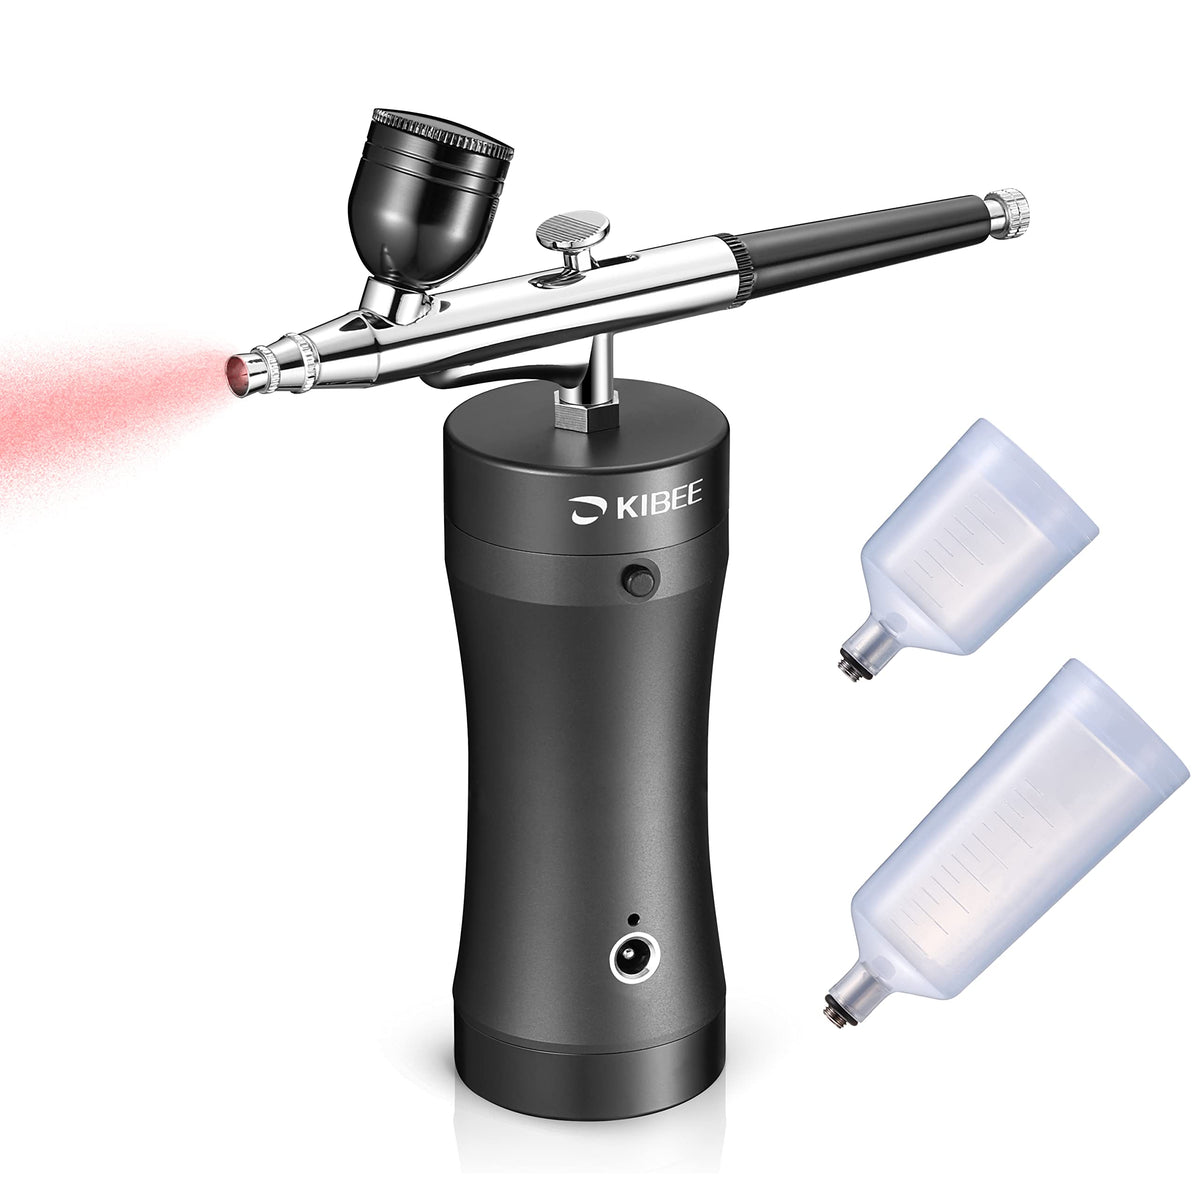  Airbrush Kit with Air Compressor, Airbrush Kit for